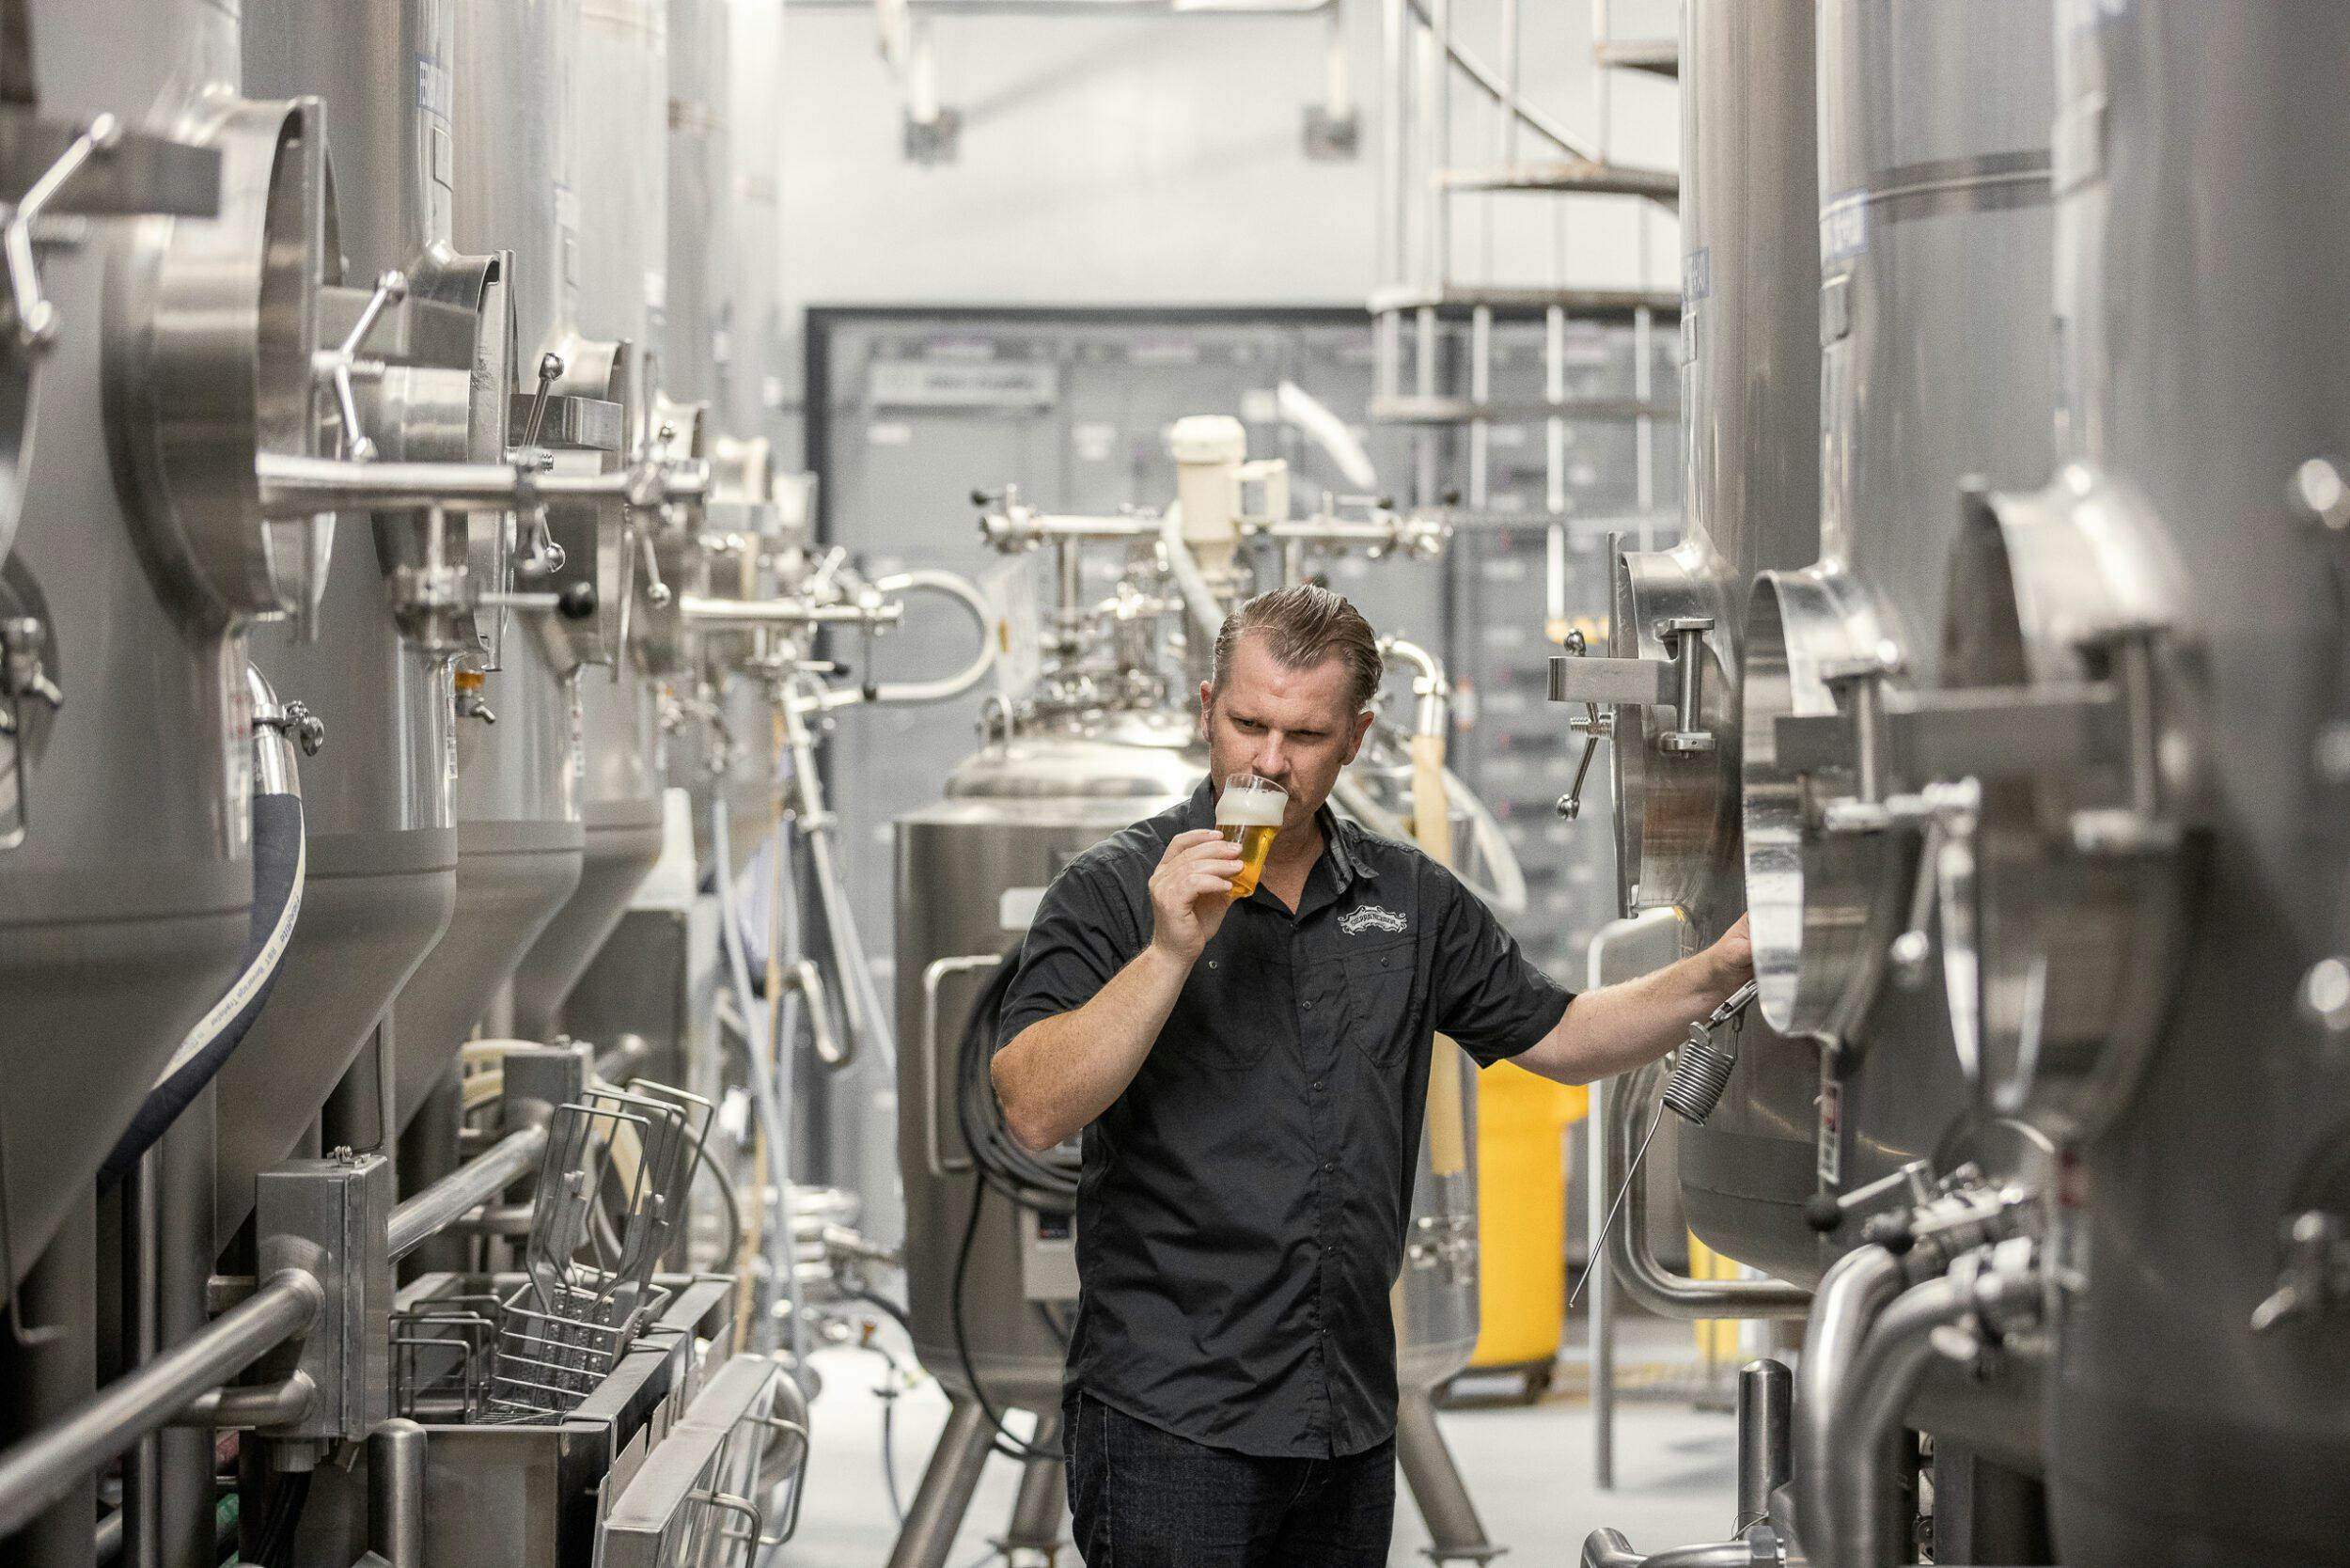 A Sierra Nevada brewer smelling a sample of beer in the fermentation cellar